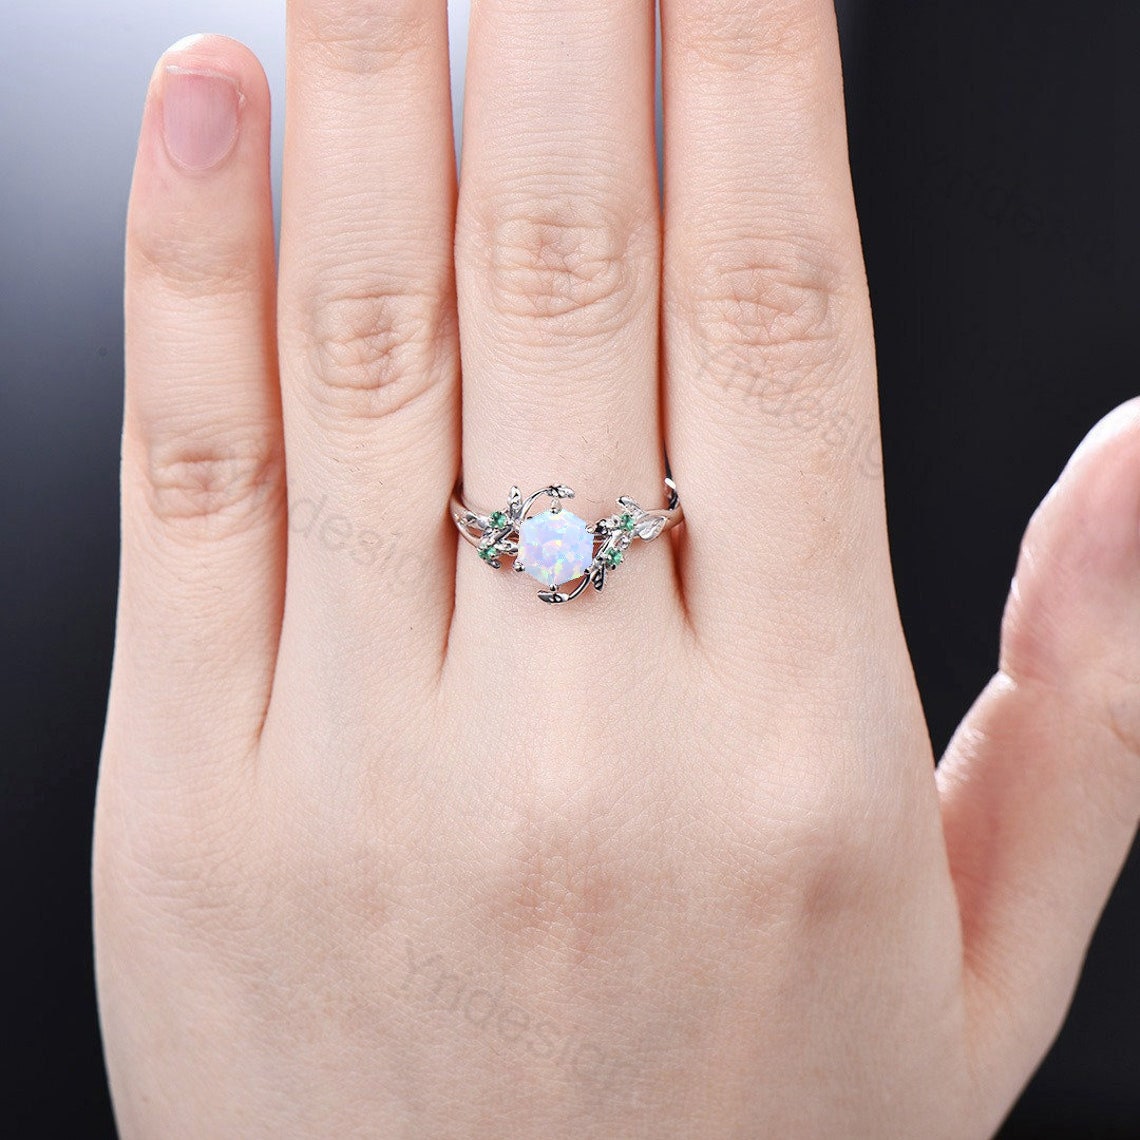 Silver opal ring, celtic style, authentic opal, unique design, jewelry gift  for girls, fast shipping, top quality craftsmanship, white gold